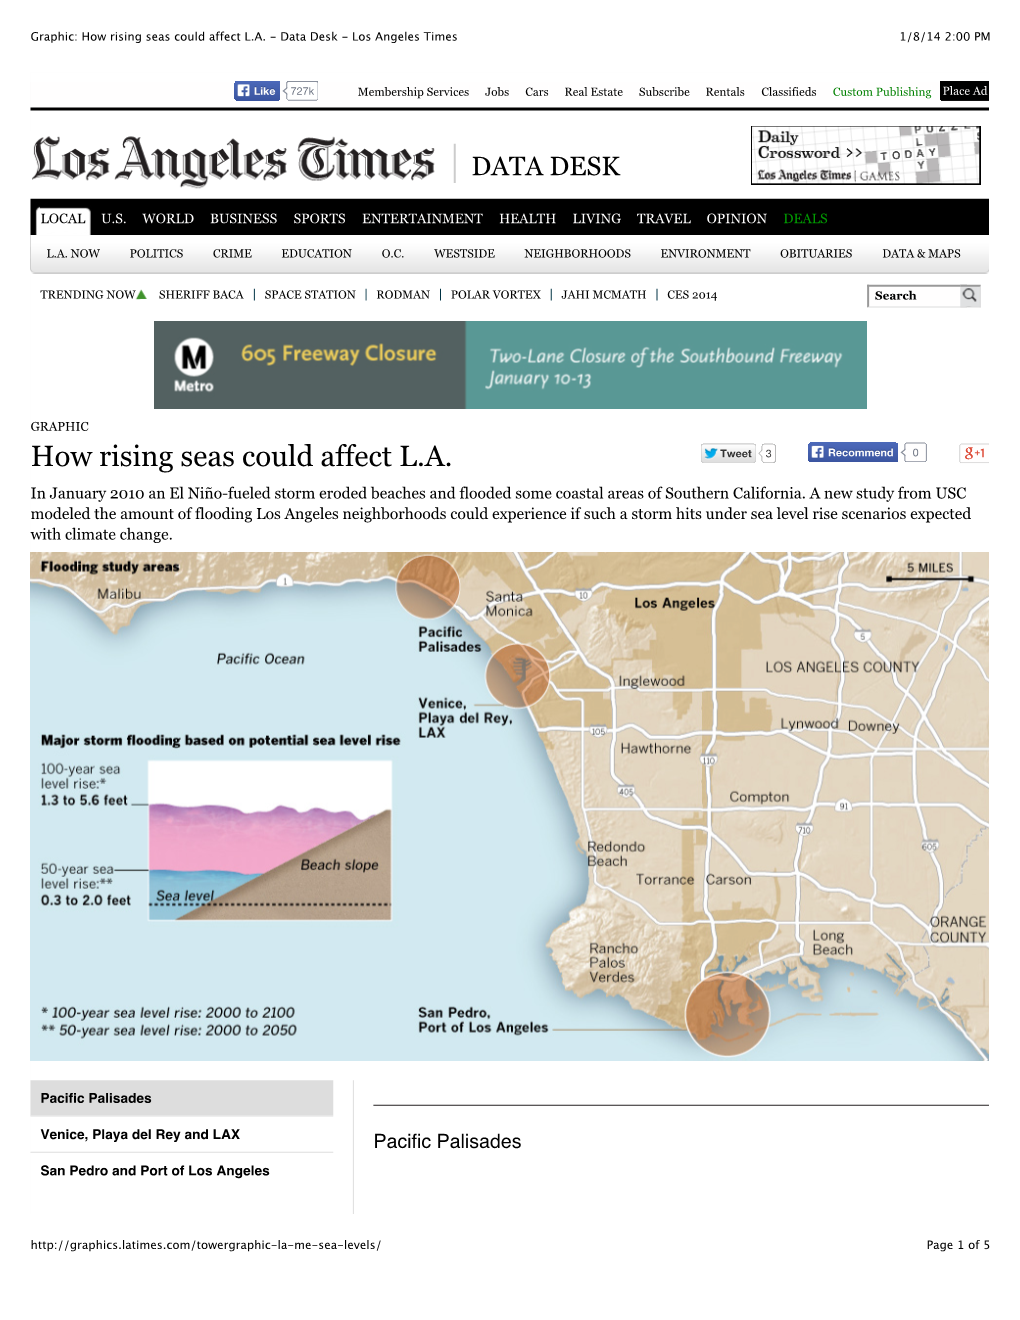 Graphic: How Rising Seas Could Affect L.A. - Data Desk - Los Angeles Times 1/8/14 2:00 PM